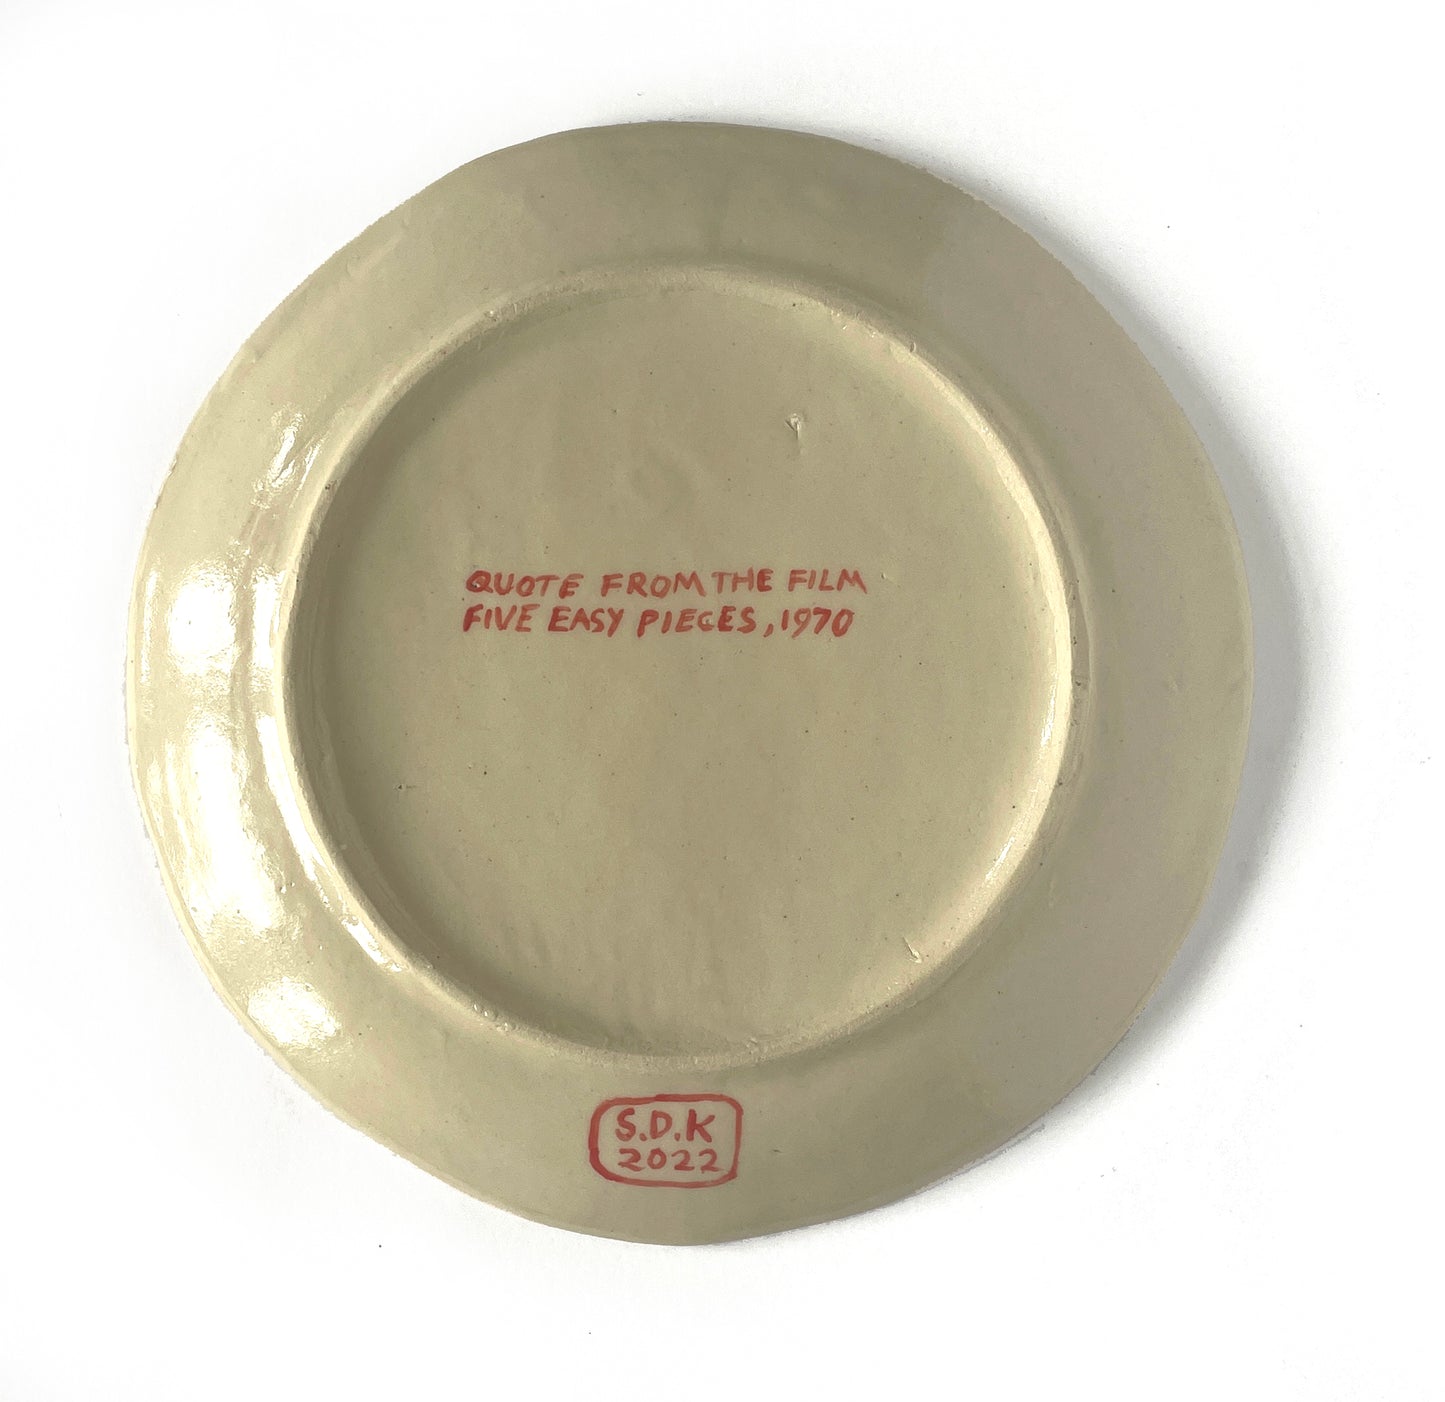 Five Easy Pieces – 'You Want Me To Hold The Chicken?' Plate reverse